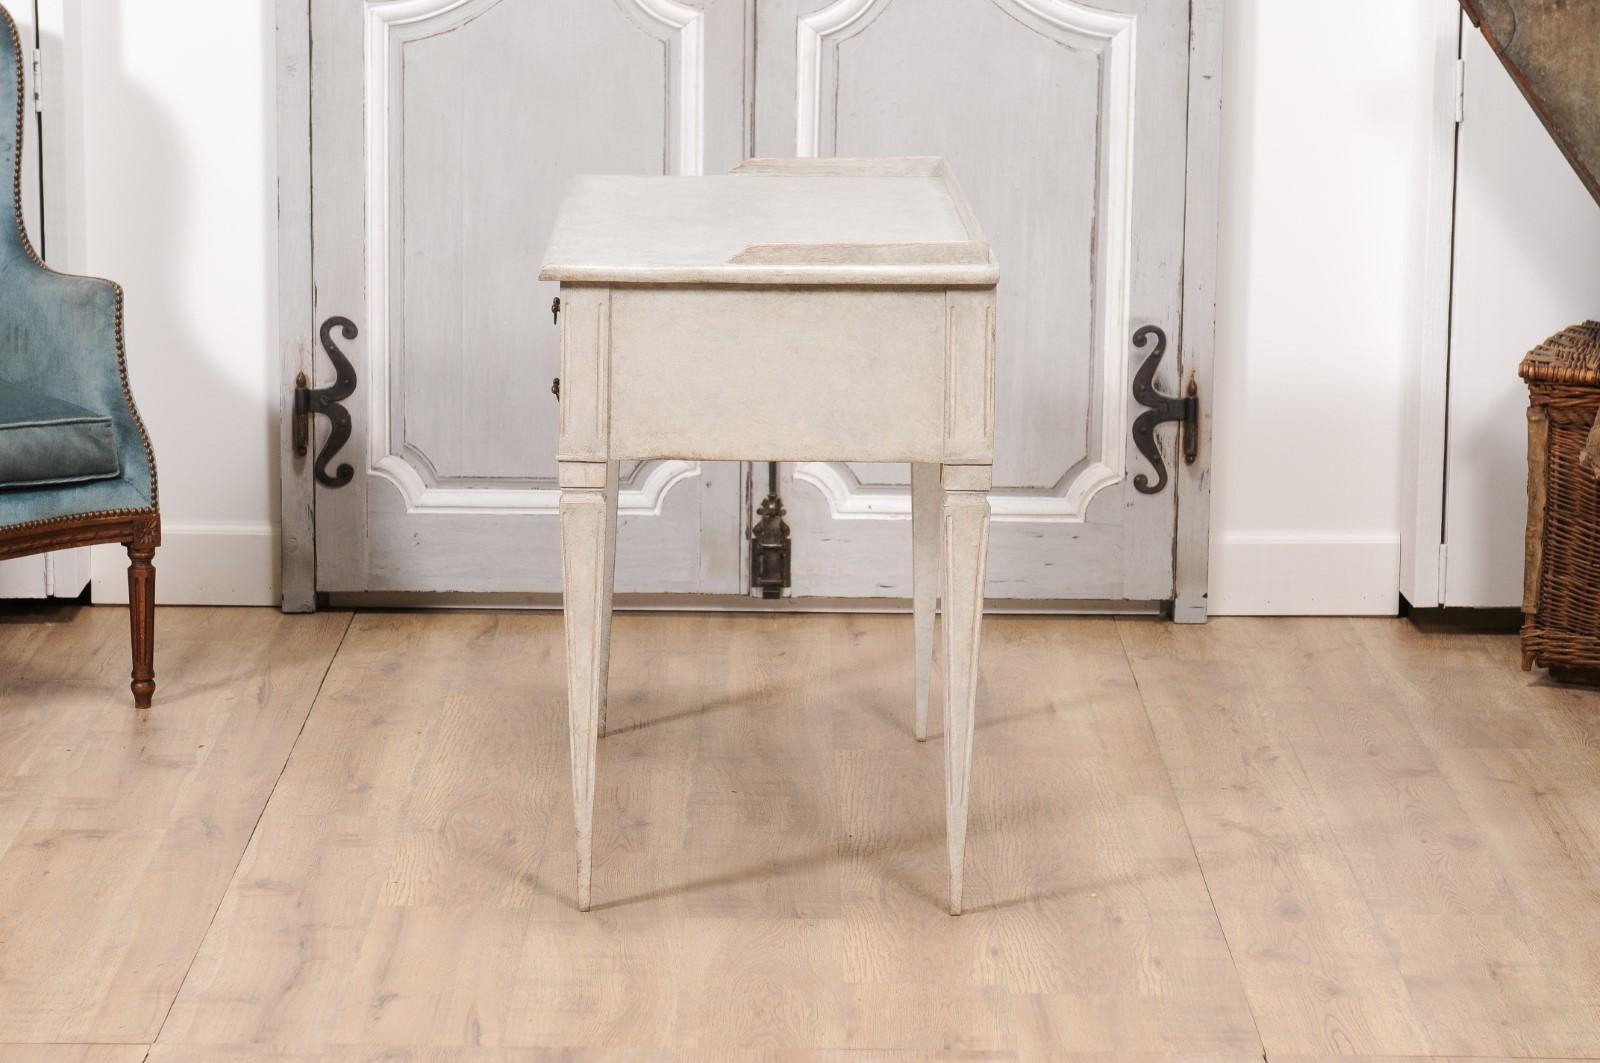 1880s Swedish Gustavian Style Painted Desk with Five Drawers and Tapered Legs For Sale 4